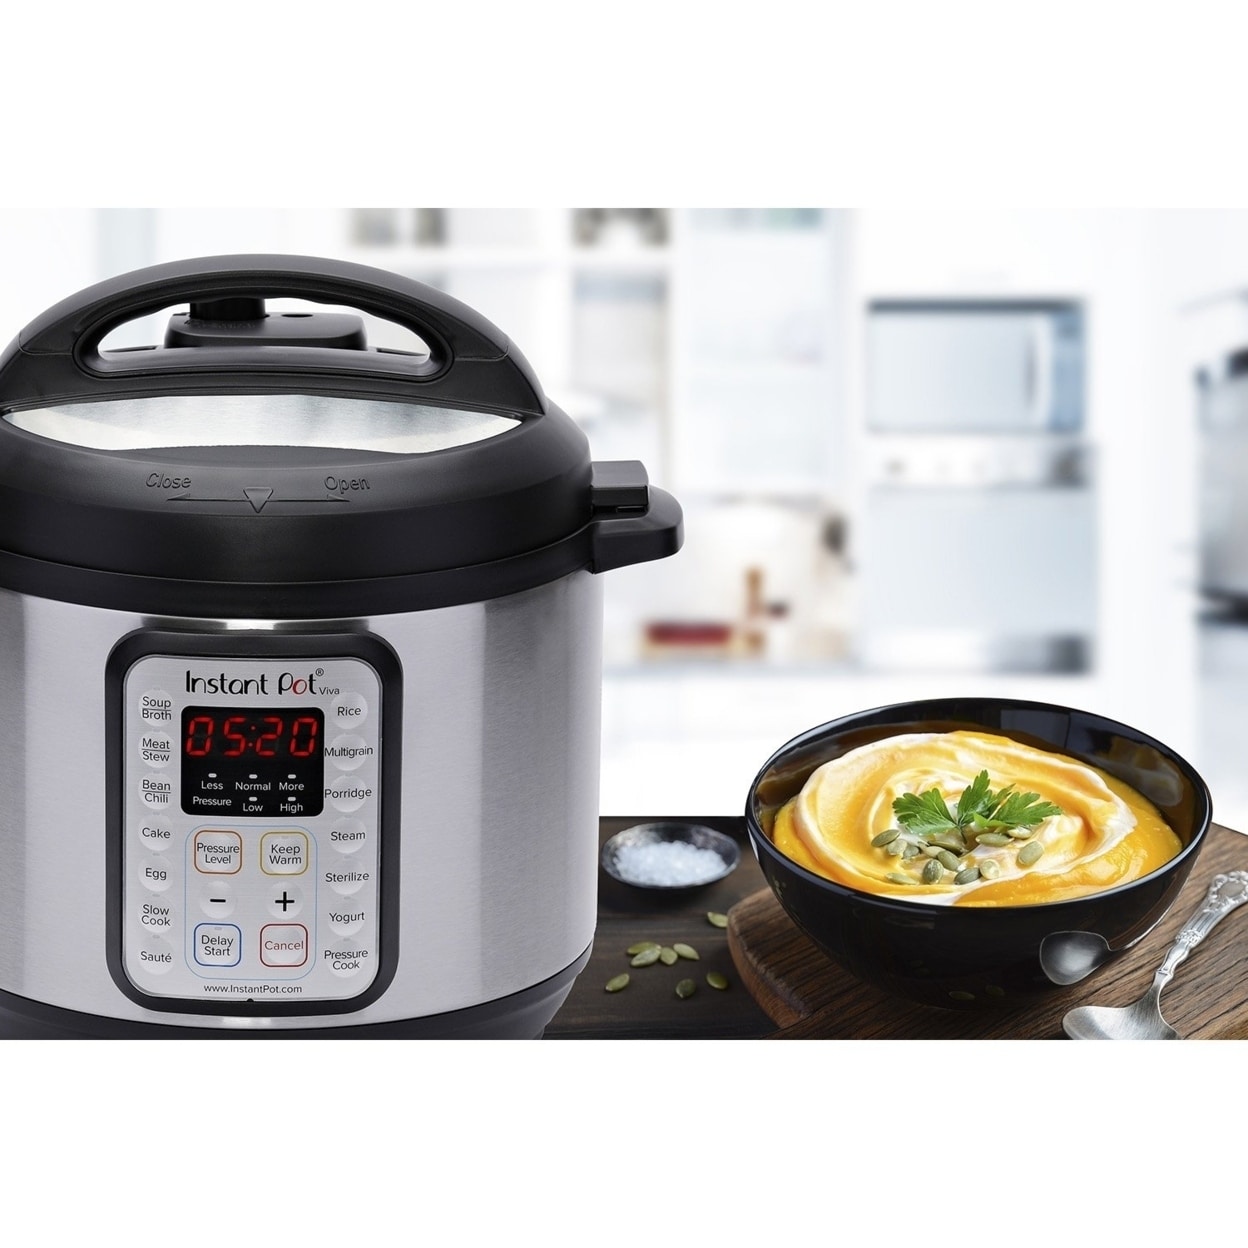 https://ak1.ostkcdn.com/images/products/is/images/direct/85b7a8f9b403a16f7d17e7d2971be825b3b53aed/Instant-Pot-8-Qt-Viva-9-In-1-Multi-Use-Programmable-Pressure-Cooker.jpg